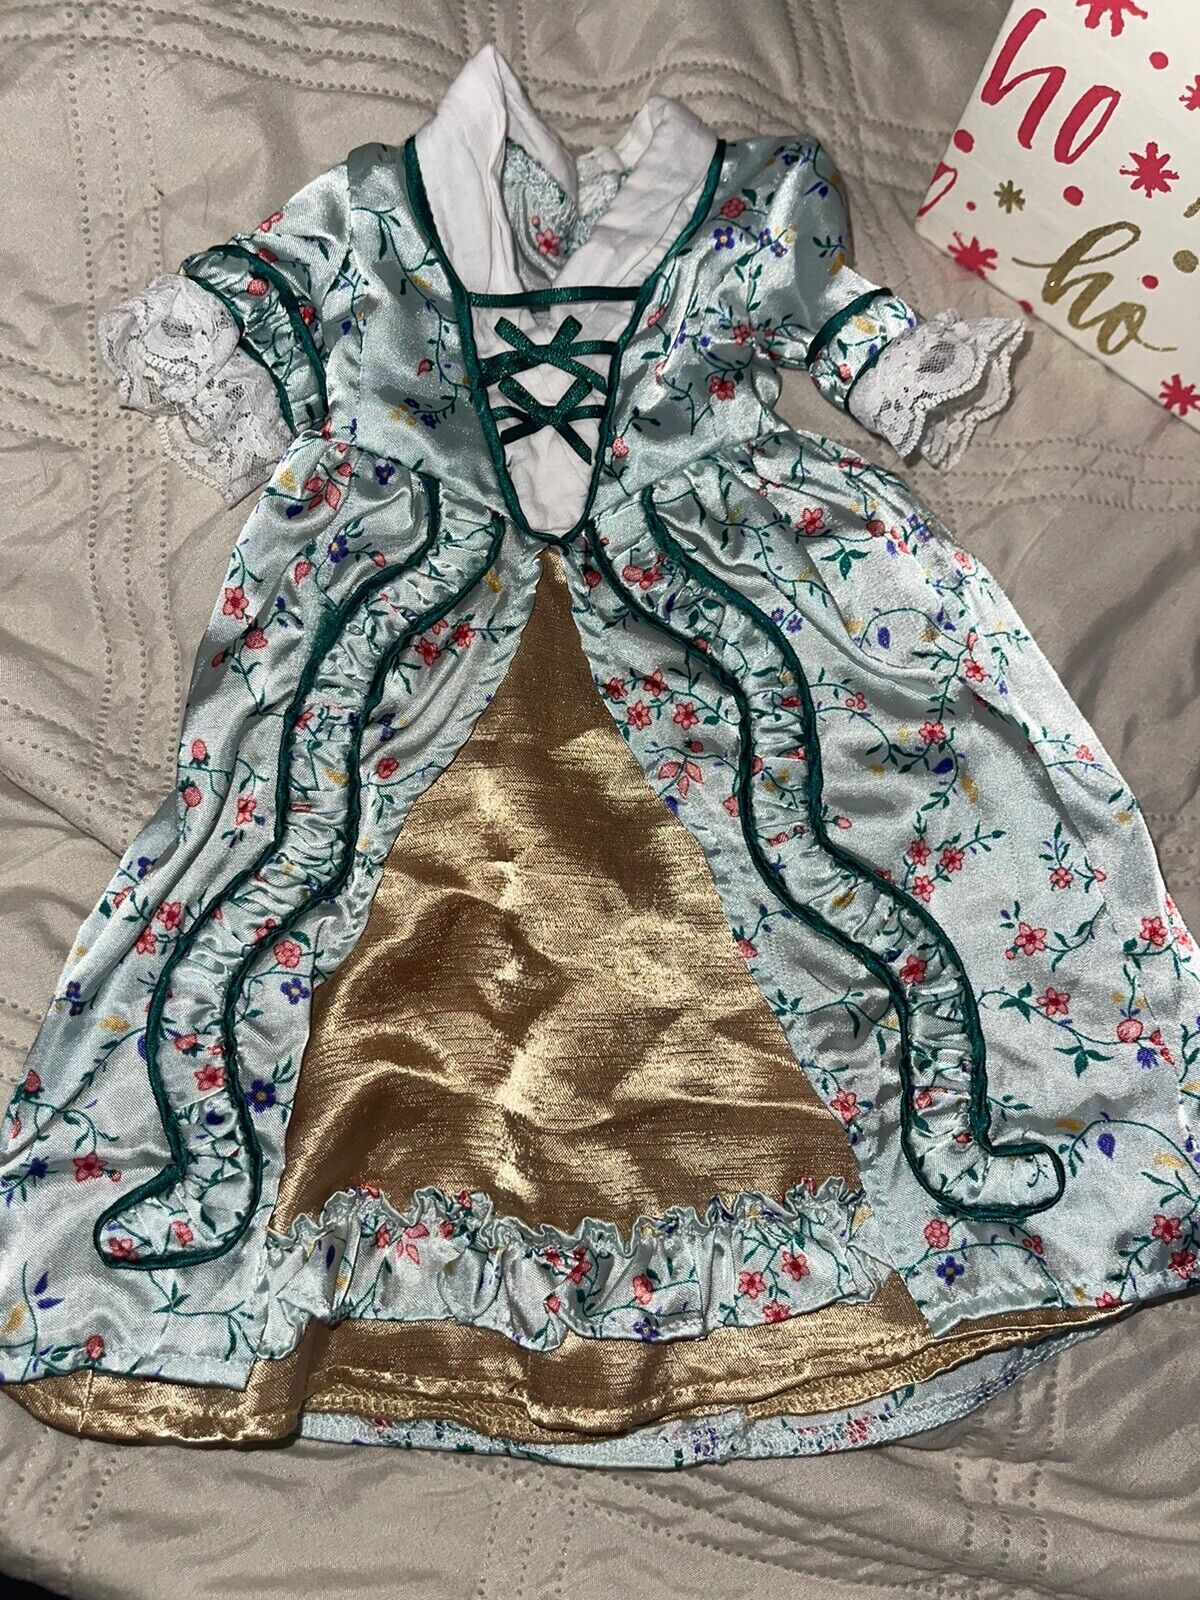 Mint Vintage American Girl Doll Elizabeth Floral Christmas Holiday Gown Dress